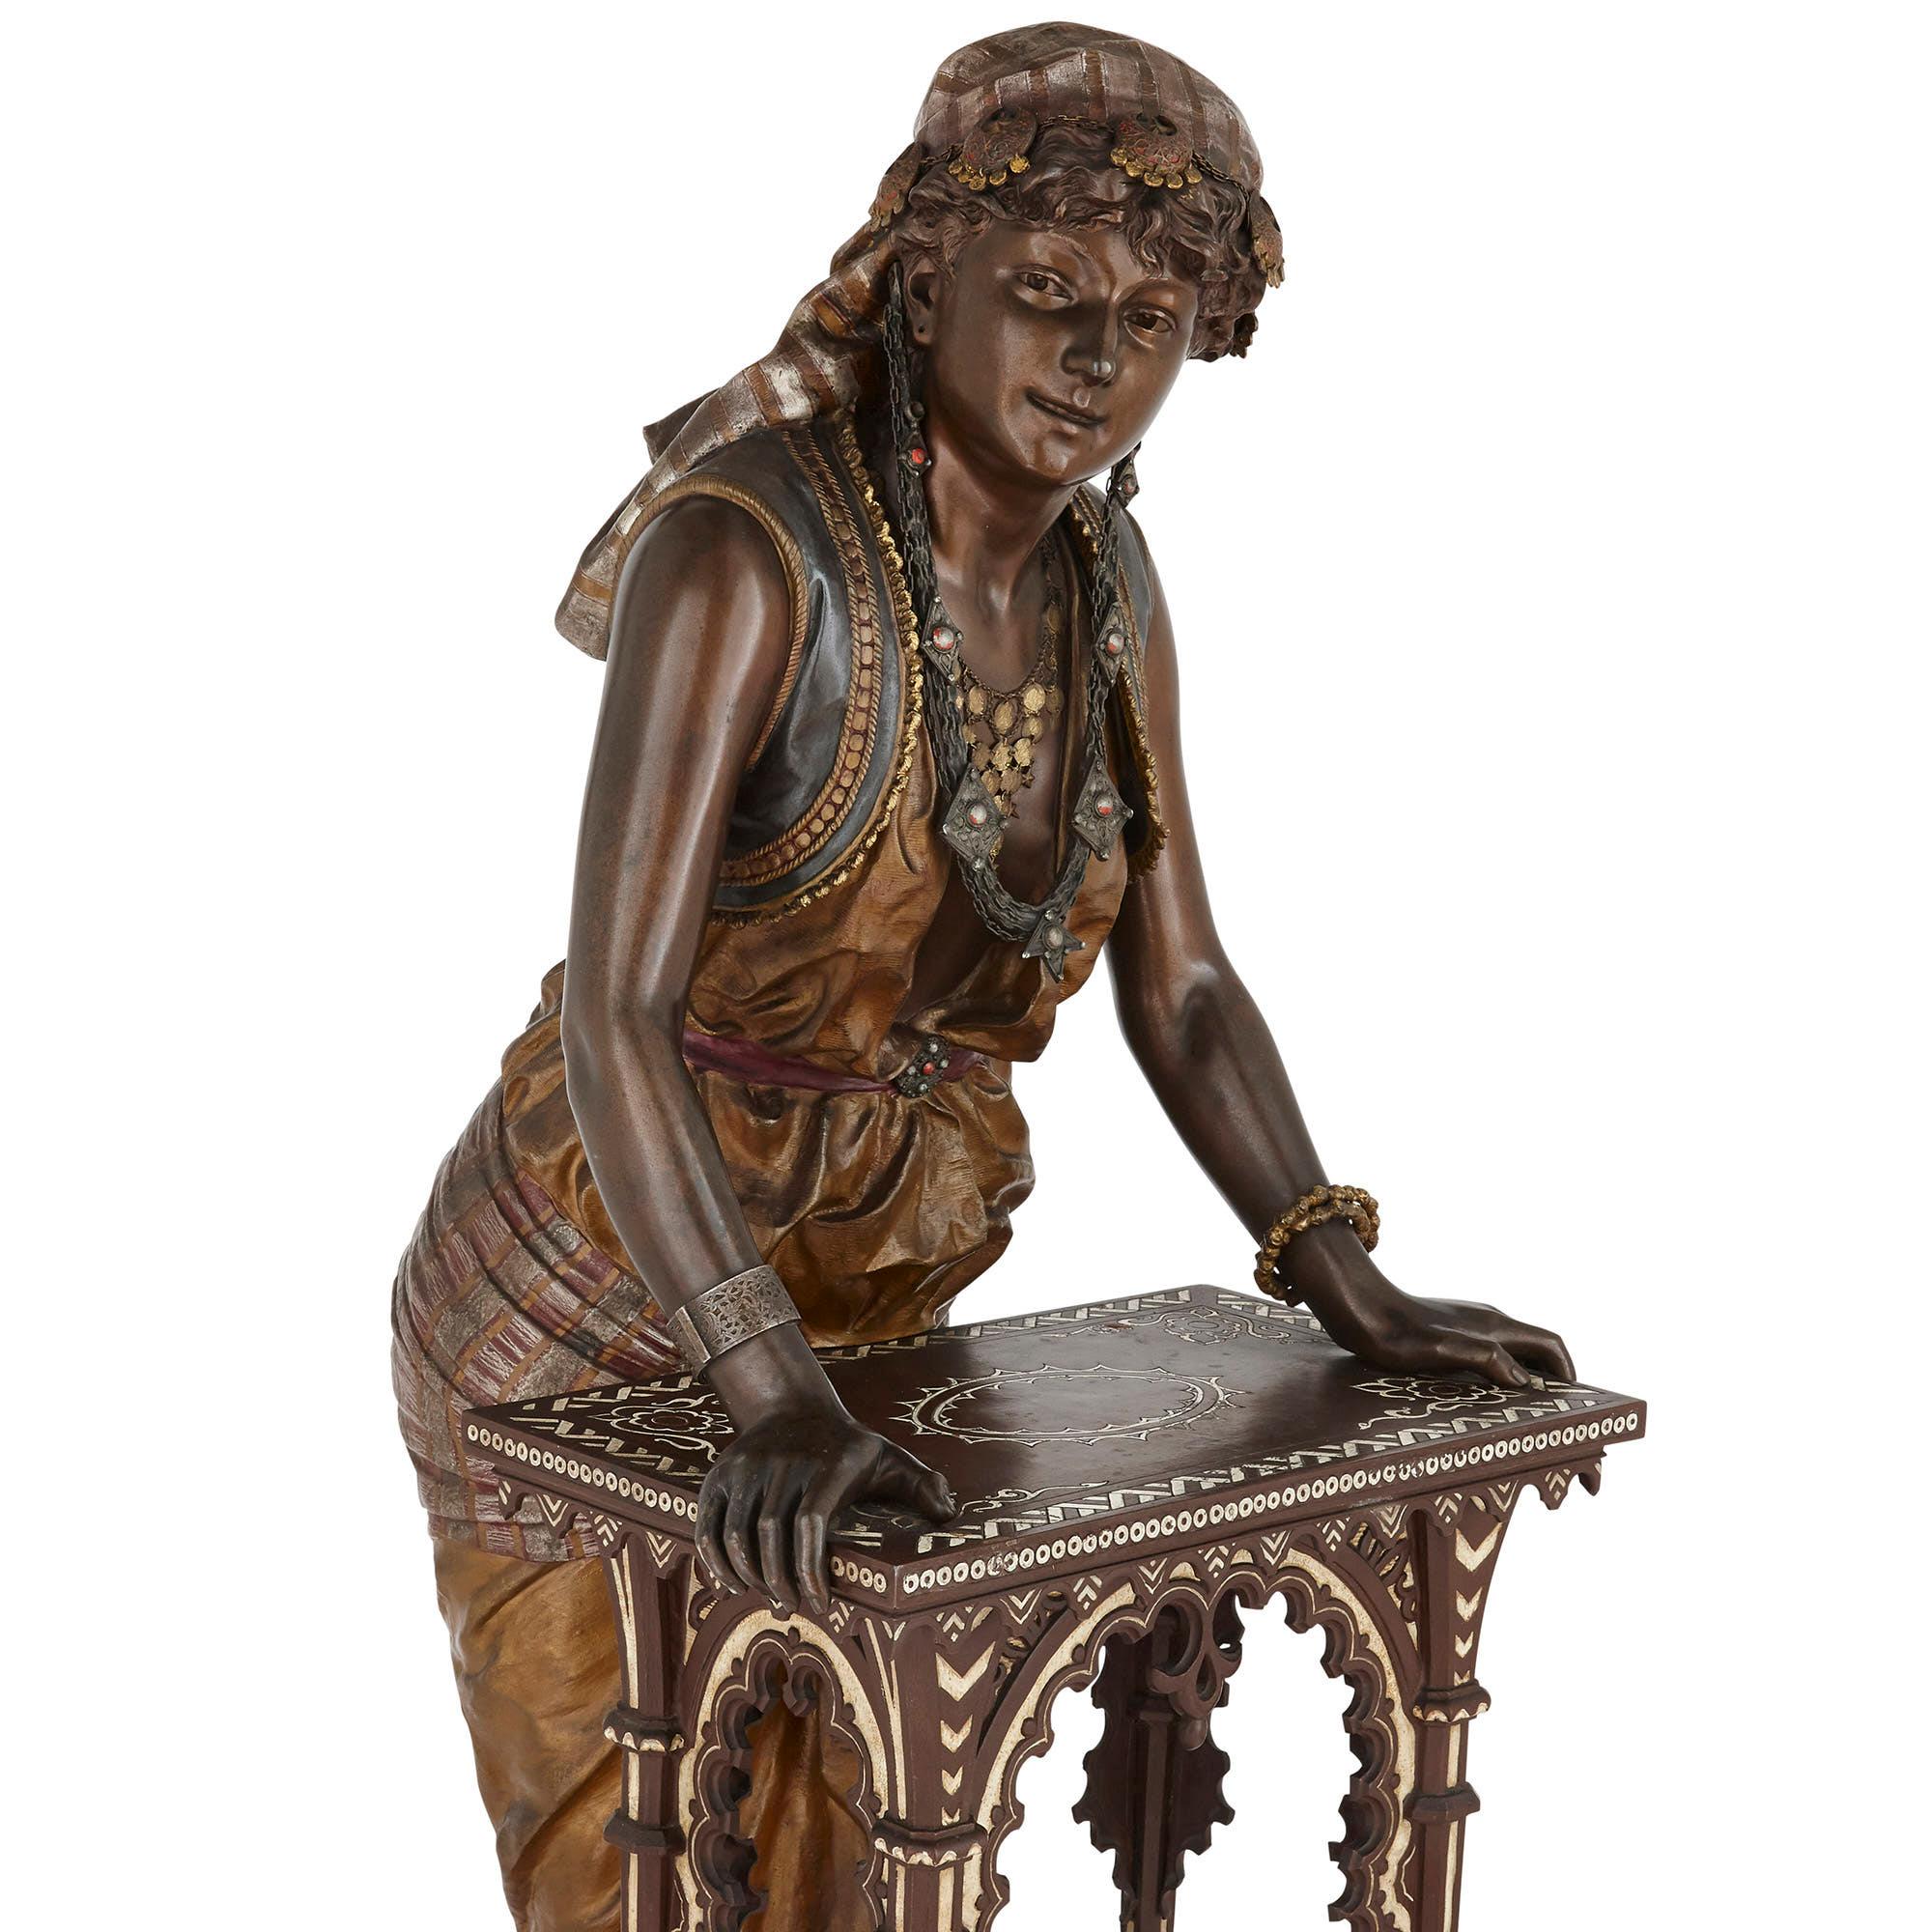 Monumental French sculpture of a female figure with table by Louis Hottot
French, late 19th century
Measures: Height 145cm, width 51cm, depth 57cm

Cast by the renowned sculptor Louis Hottot (French, 1829-1905), this beautiful Orientalist